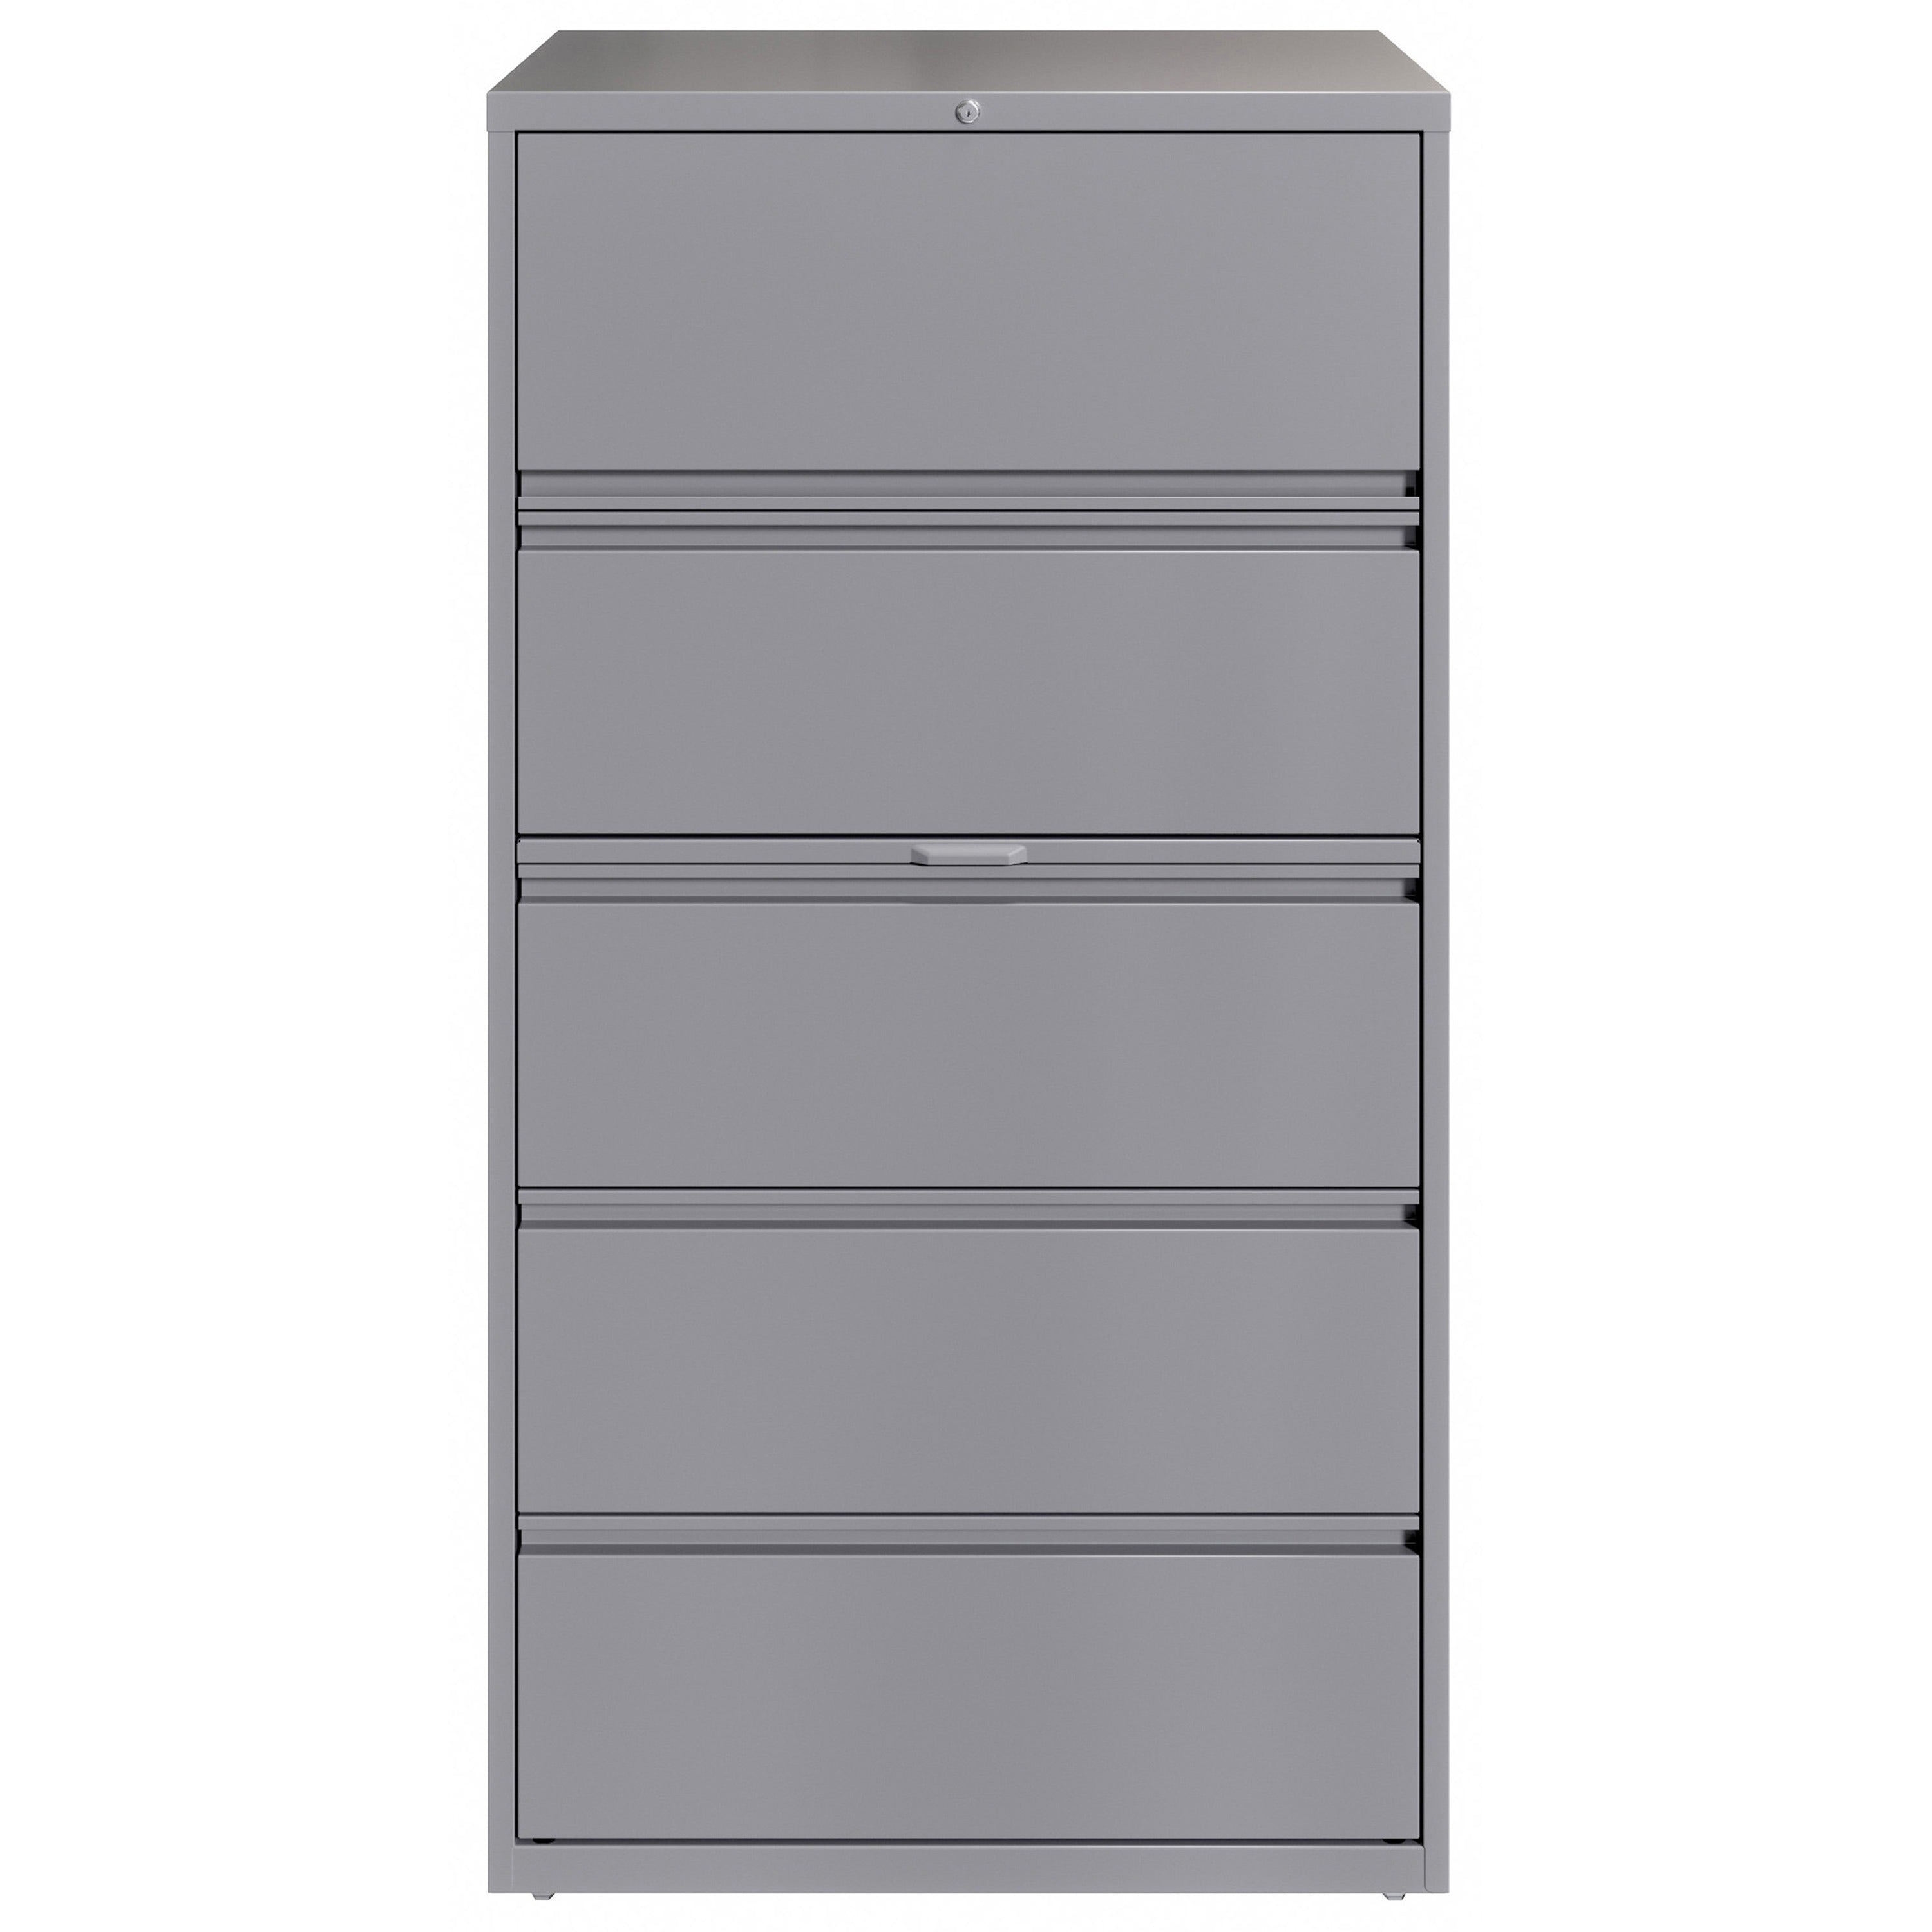 lorell-fortress-series-lateral-file-w-roll-out-posting-shelf-36-x-186-x-676-5-x-drawers-for-file-letter-legal-a4-lateral-hanging-rail-magnetic-label-holder-locking-drawer-locking-bar-ball-bearing-slide-reinforced-base-adjusta_llr00040 - 2